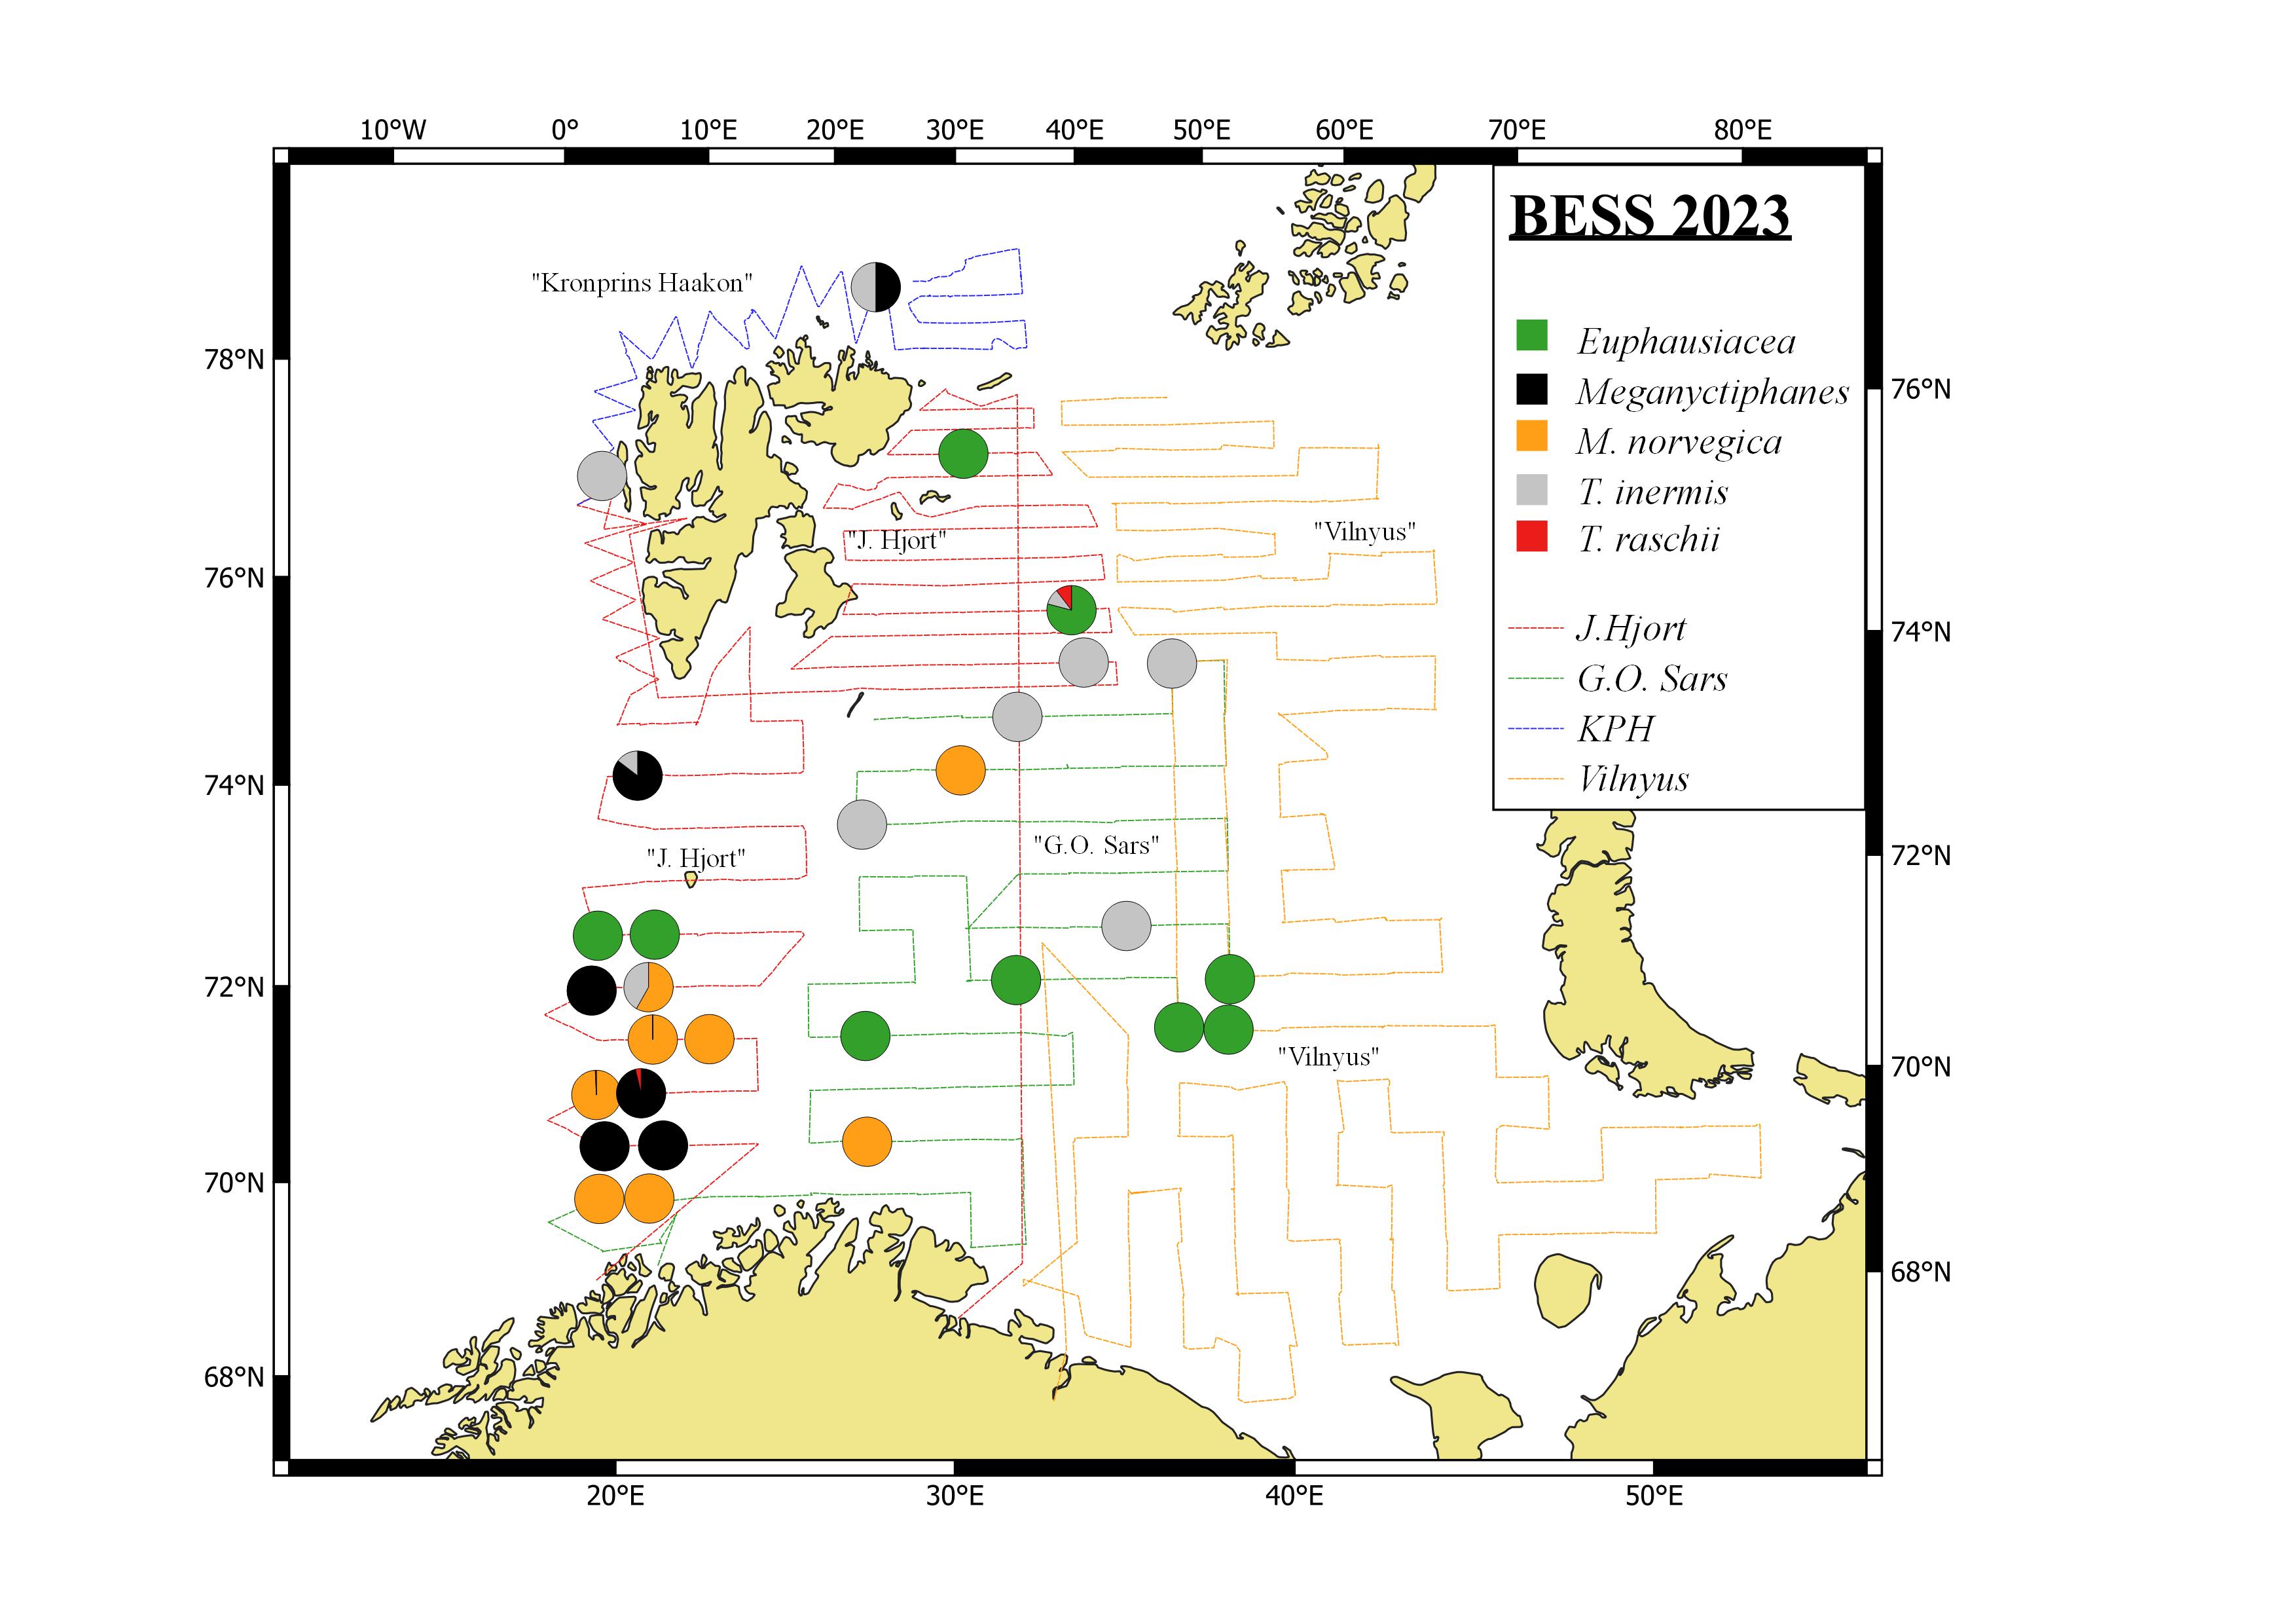 Figure 5.3.1.3. Krill species distribution, based on pelagic trawl catches covering 0-60 m, in the Barents Sea in August-October 2023.